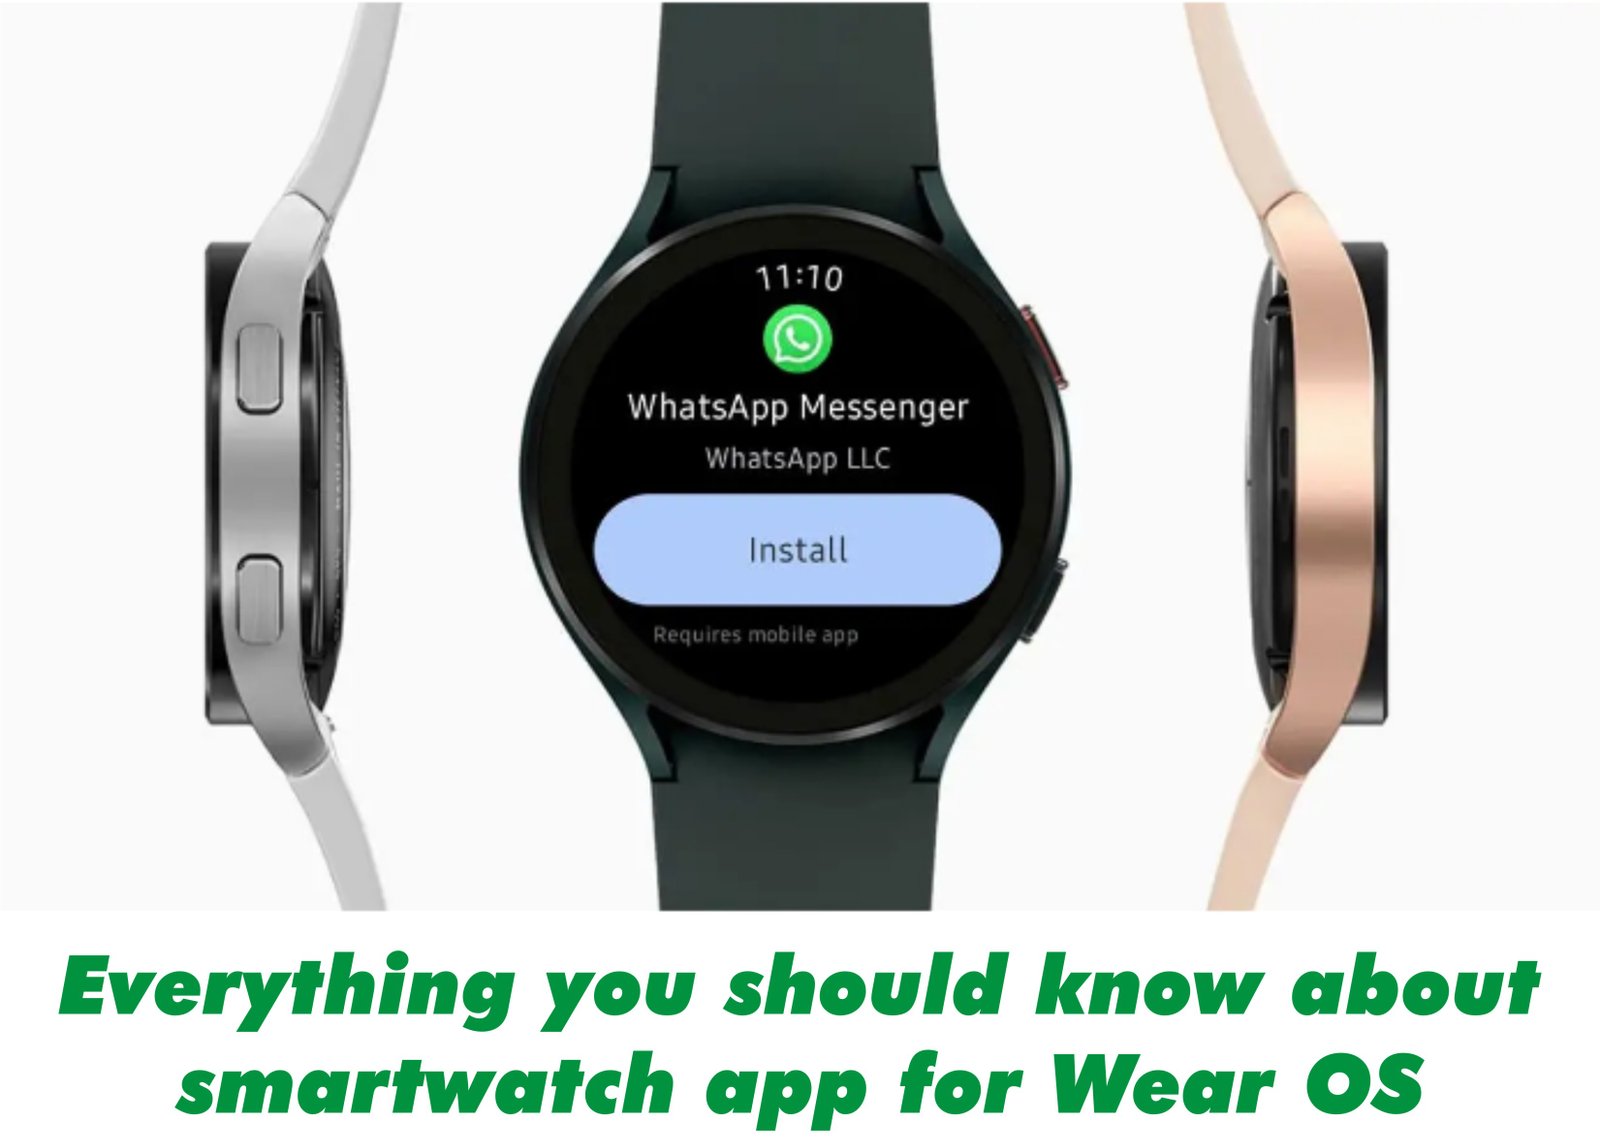 Everything You Should Know About Smartwatch Apps for Wear OS